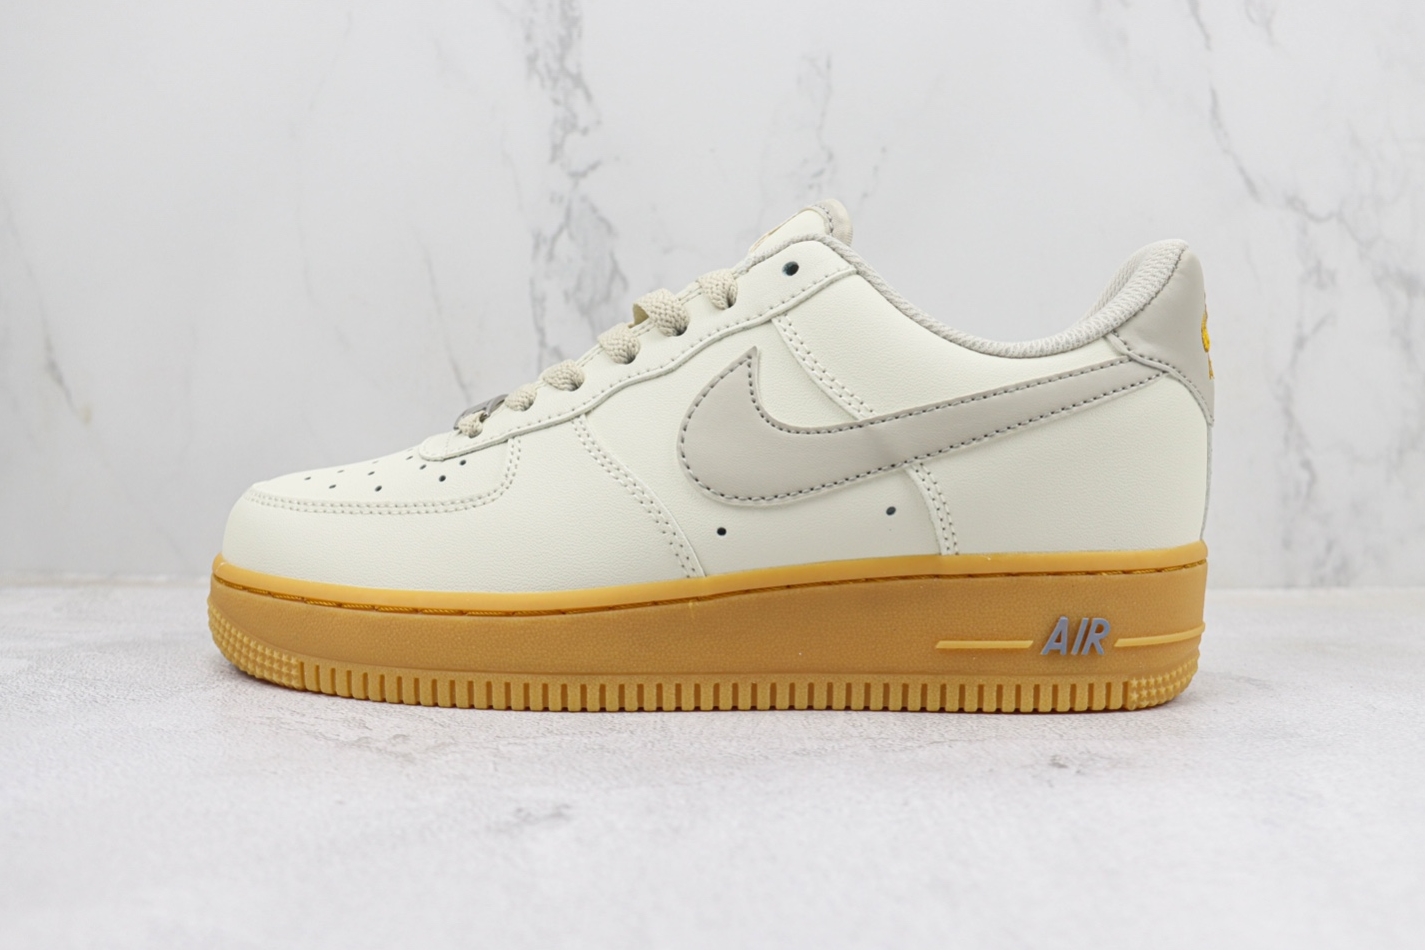 Nike Air Force 1 07 Low Light Grey Gum Gold XC2351-066 - Stylish and Comfortable Sneakers for Men